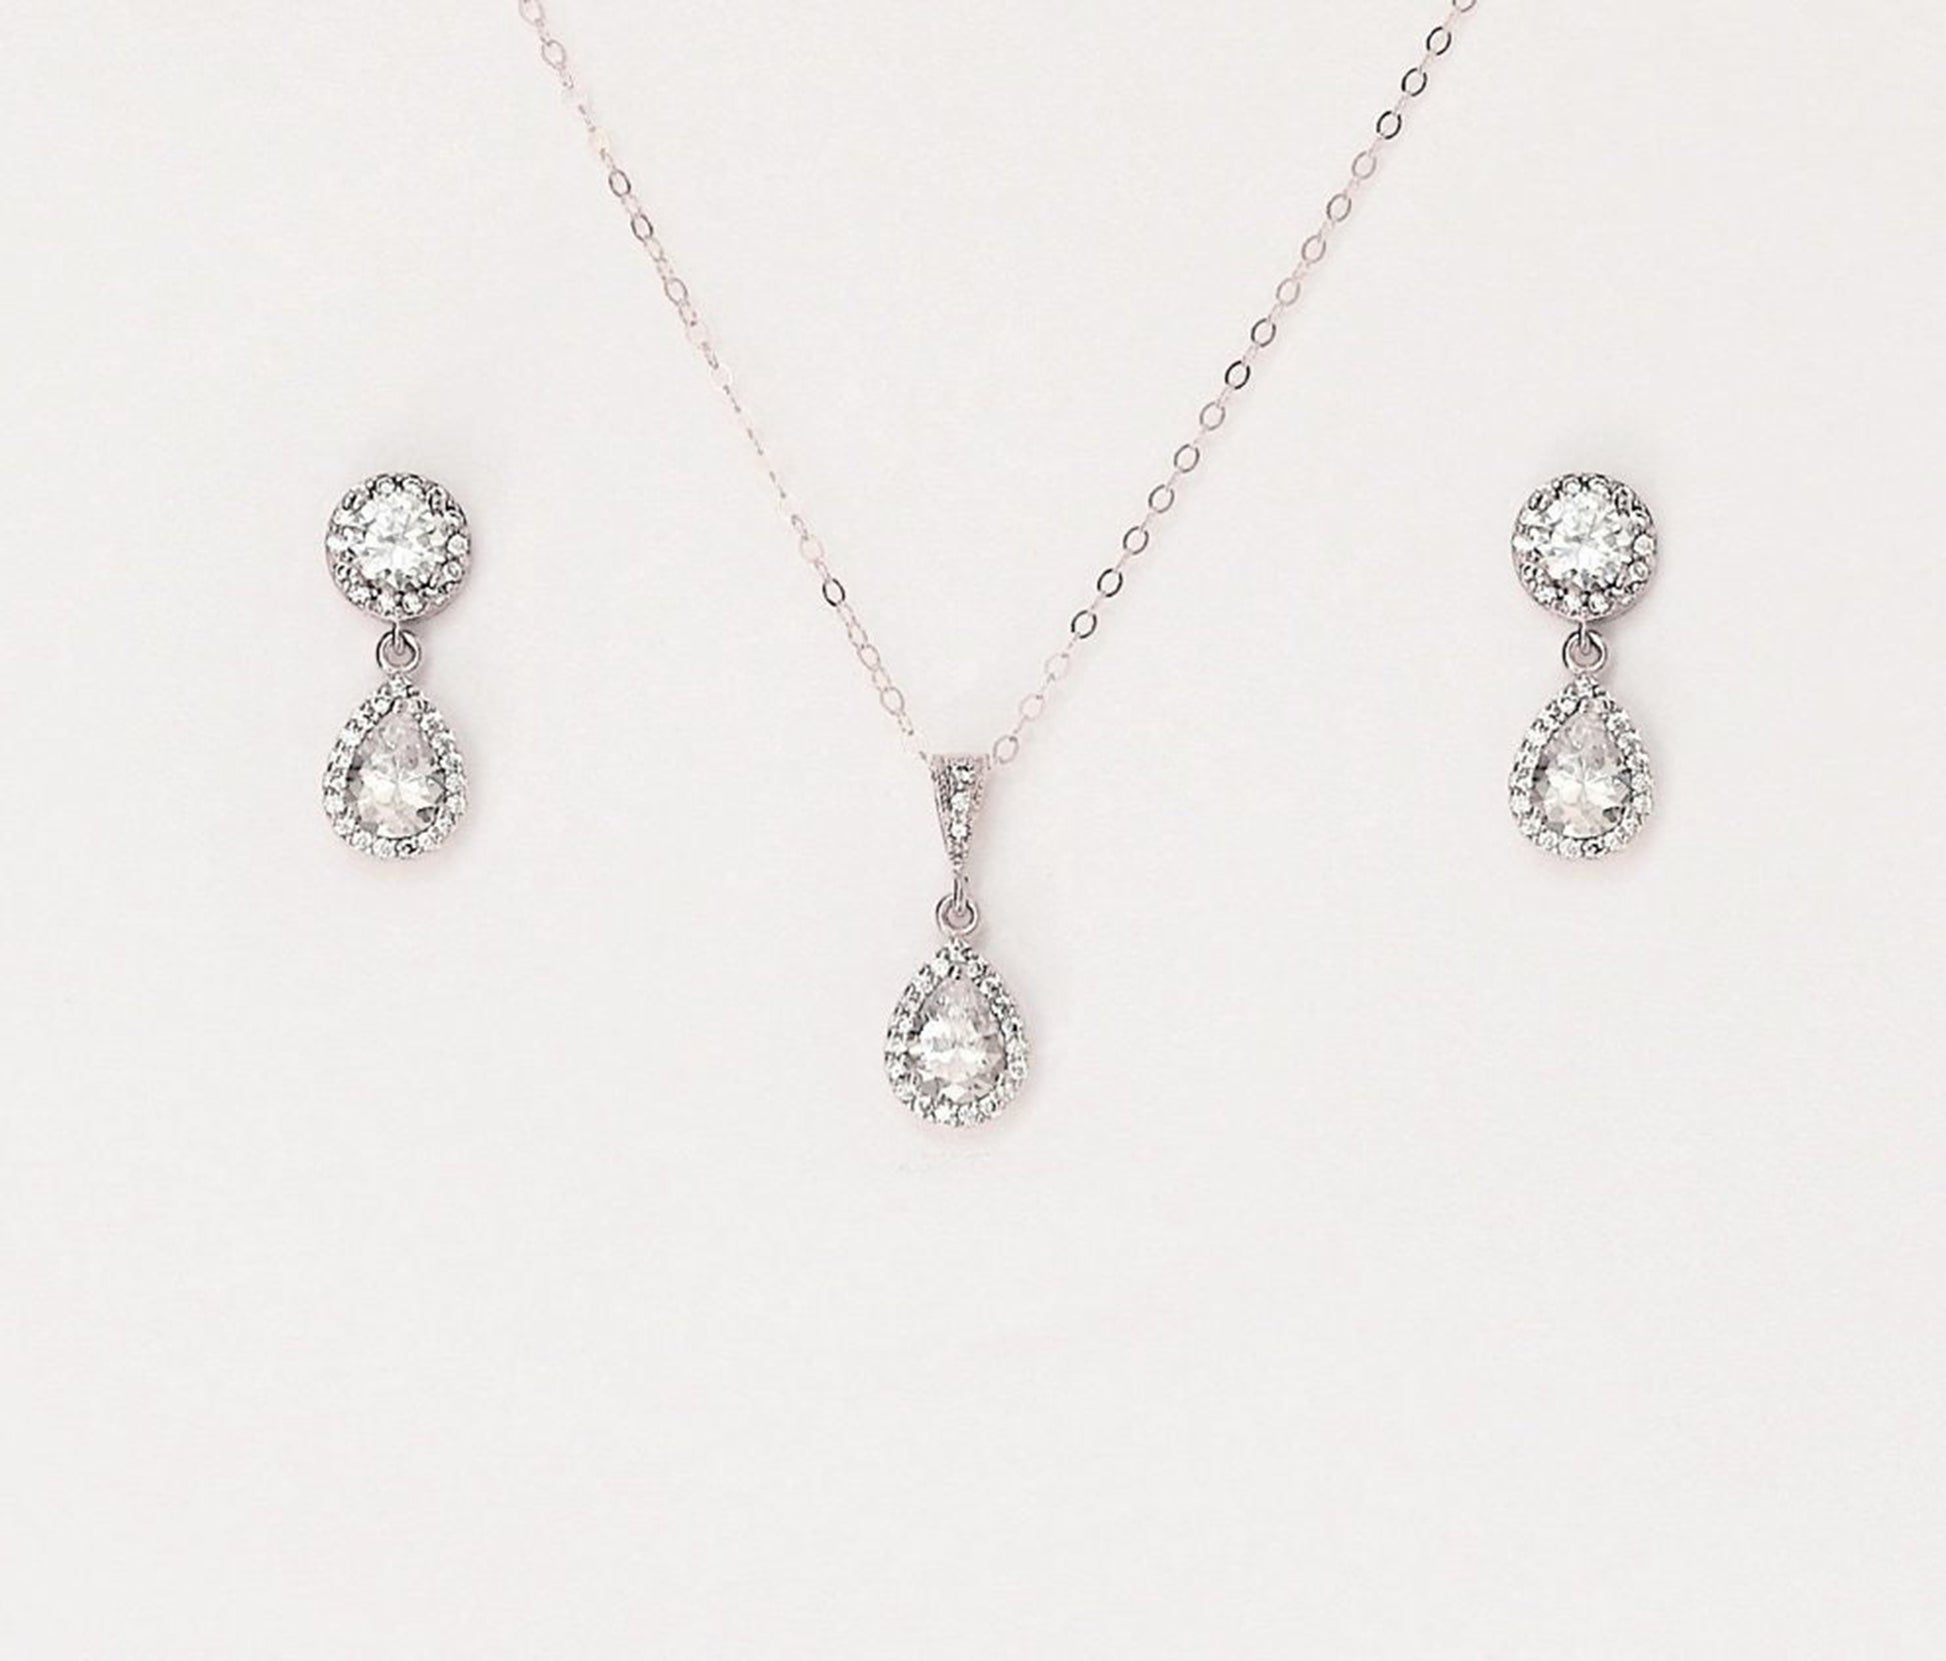 Image of A Necklace set with matching earrings-PB237018-Picxy